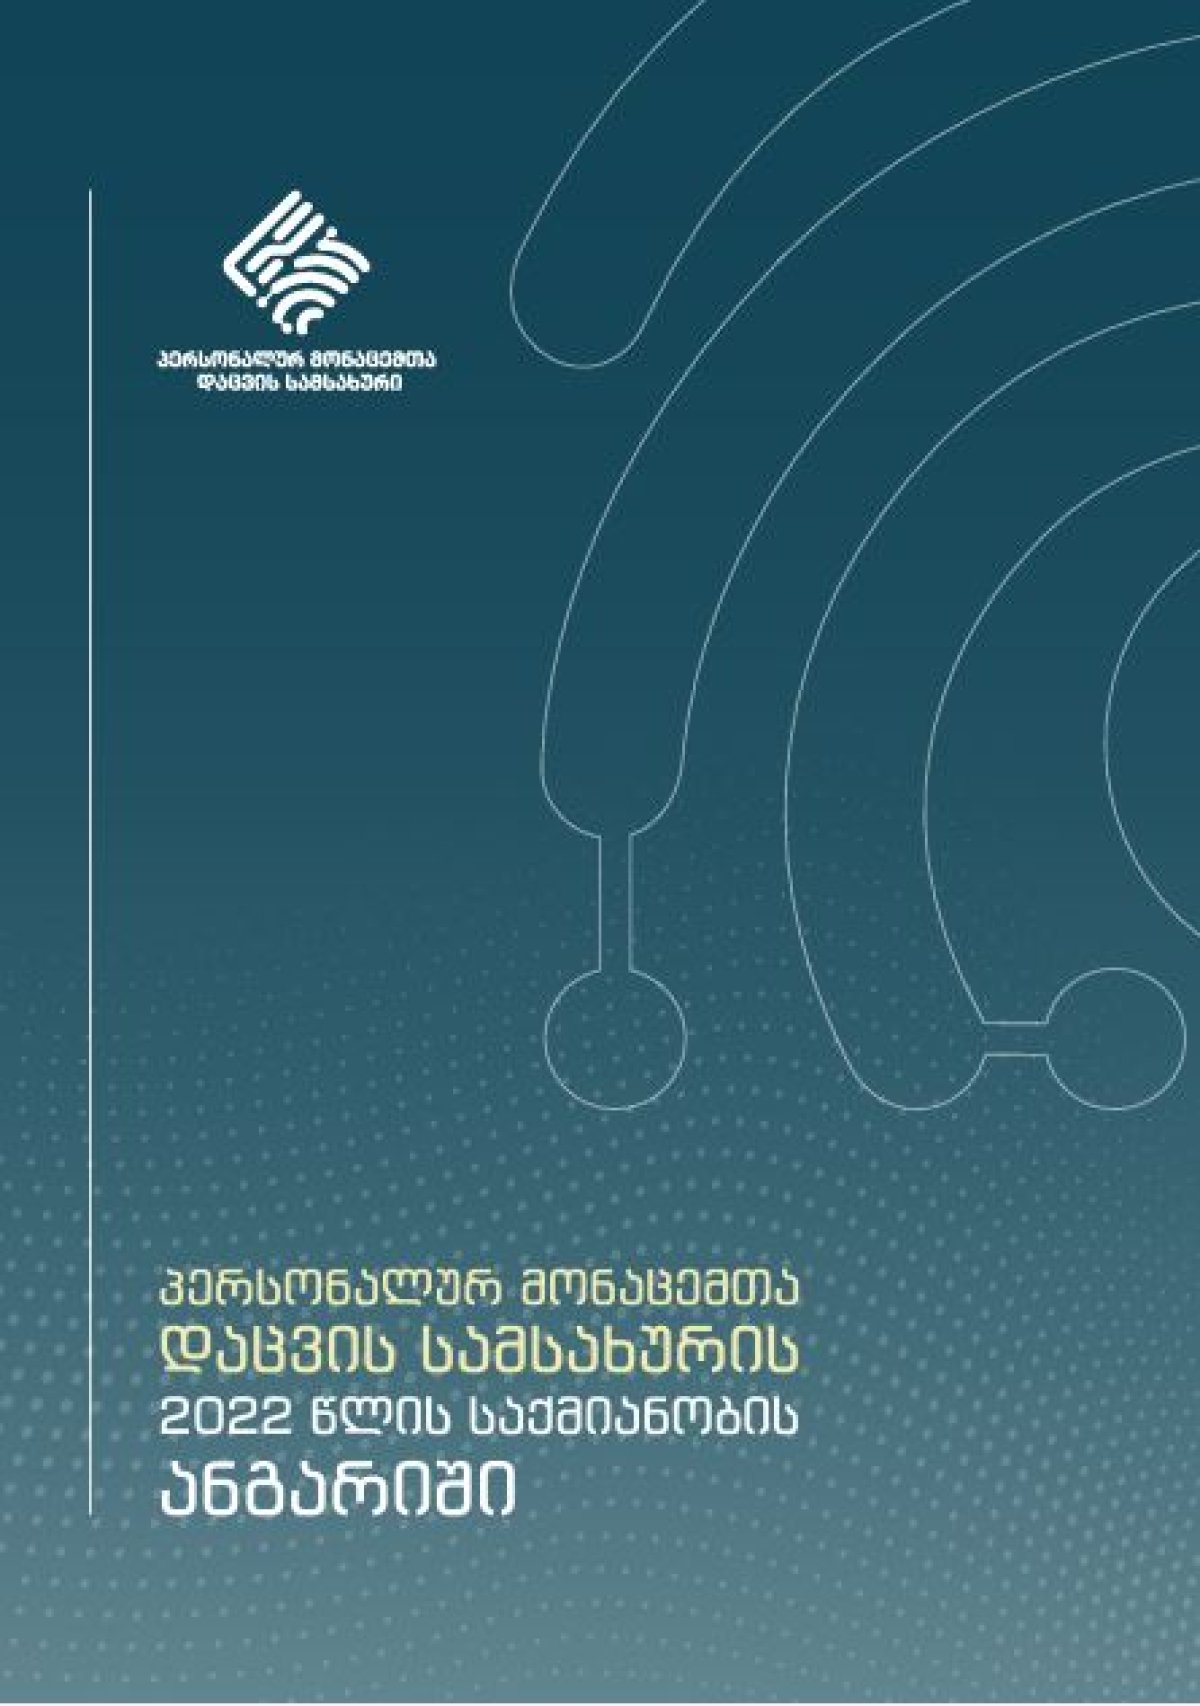 2022 ACTIVITY REPORT OF THE PERSONAL DATA PROTECTION SERVICE OF GEORGIA